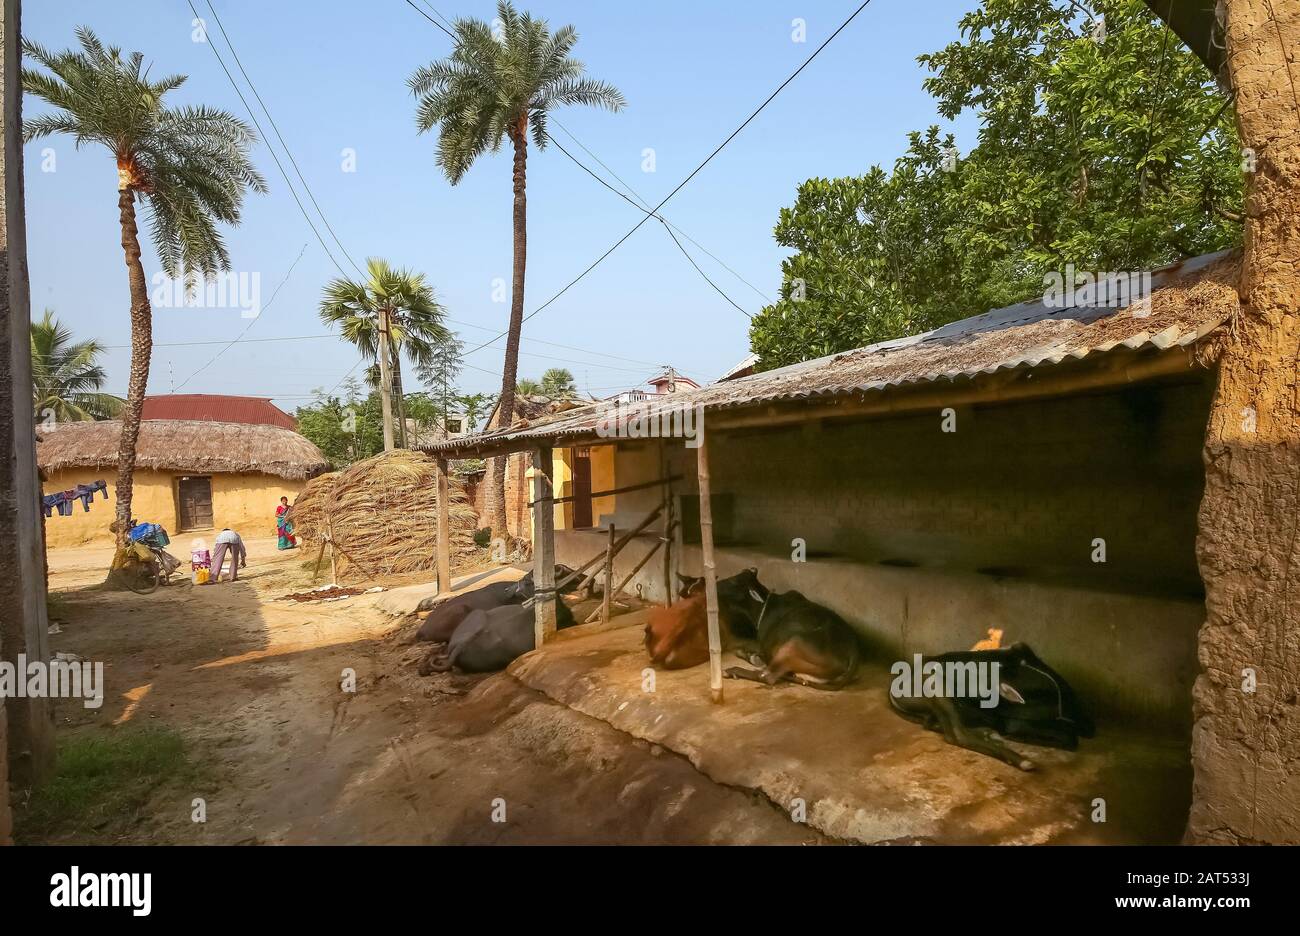 Rural Indian village at Bolpur West Bengal with view of mud hut and unpaved village road with domestic animals by the roadside Stock Photo